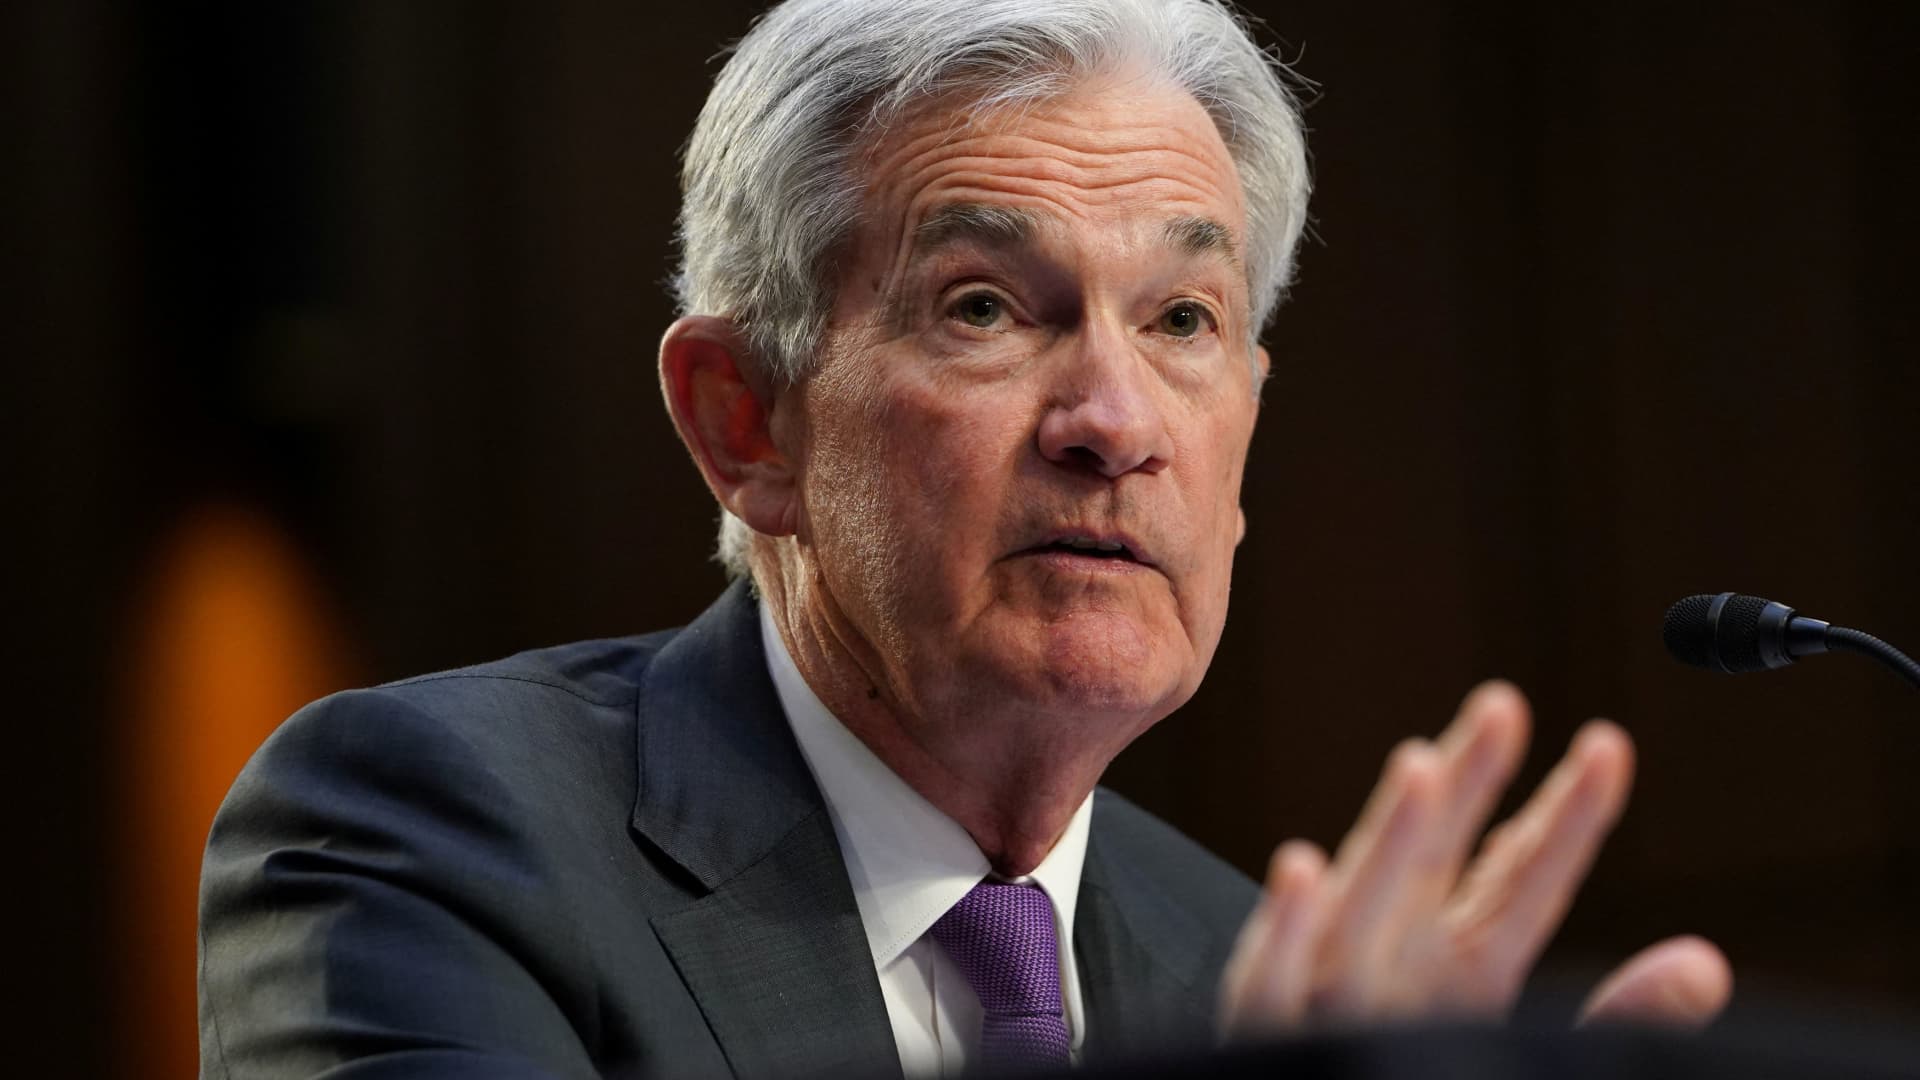 No go out ramp for Fed's Powell till he creates a recession, economist says